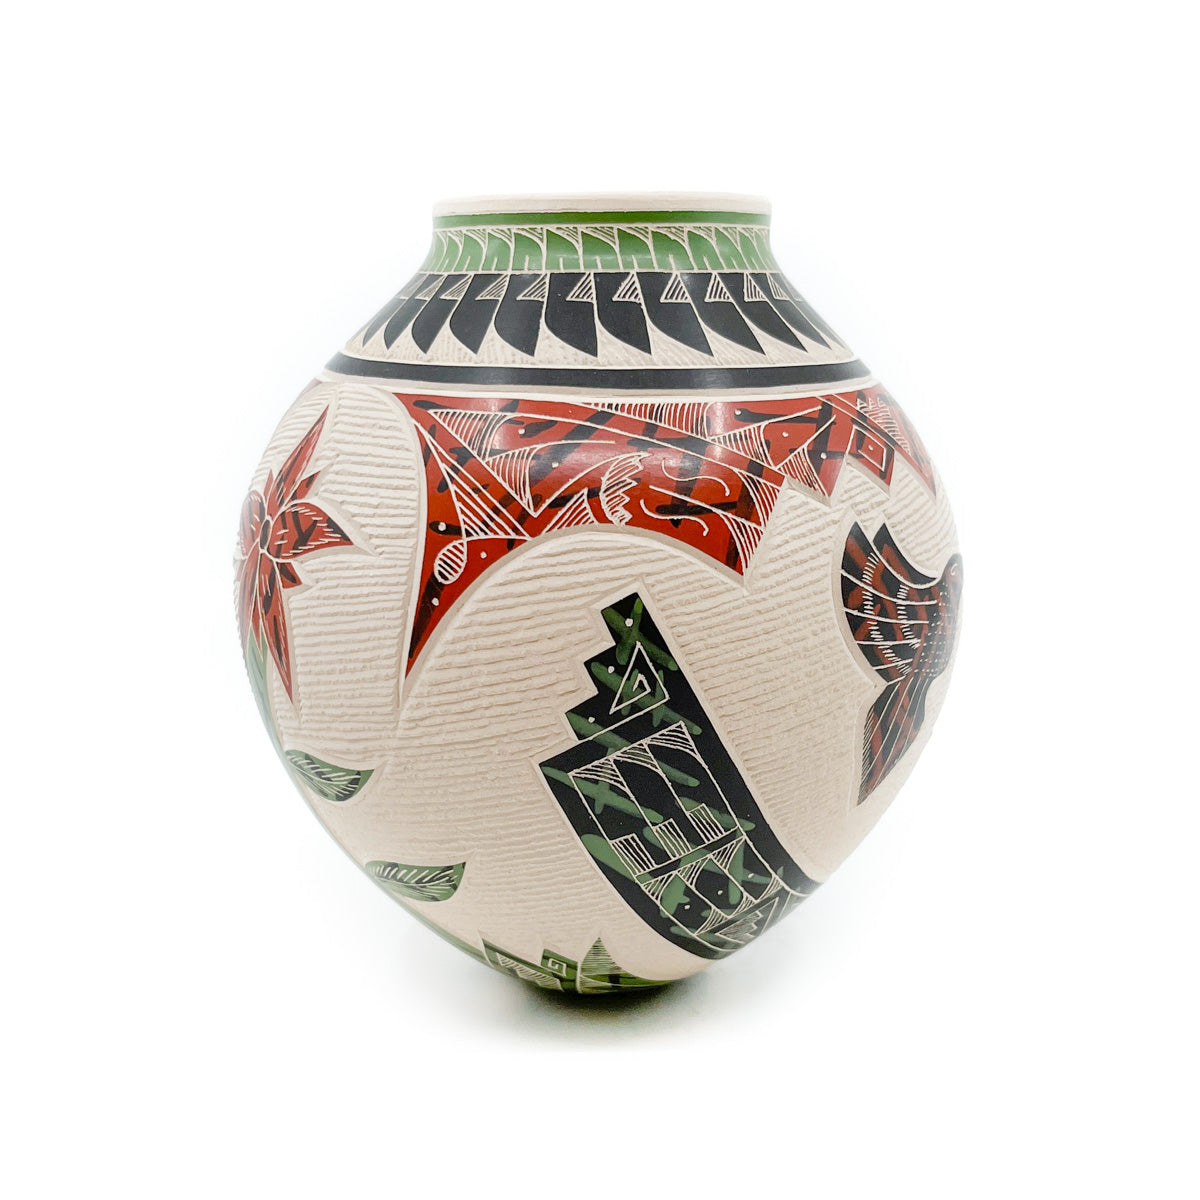 Red, Black and Green Pot with Hummingbird, Parrot and Feather Motif